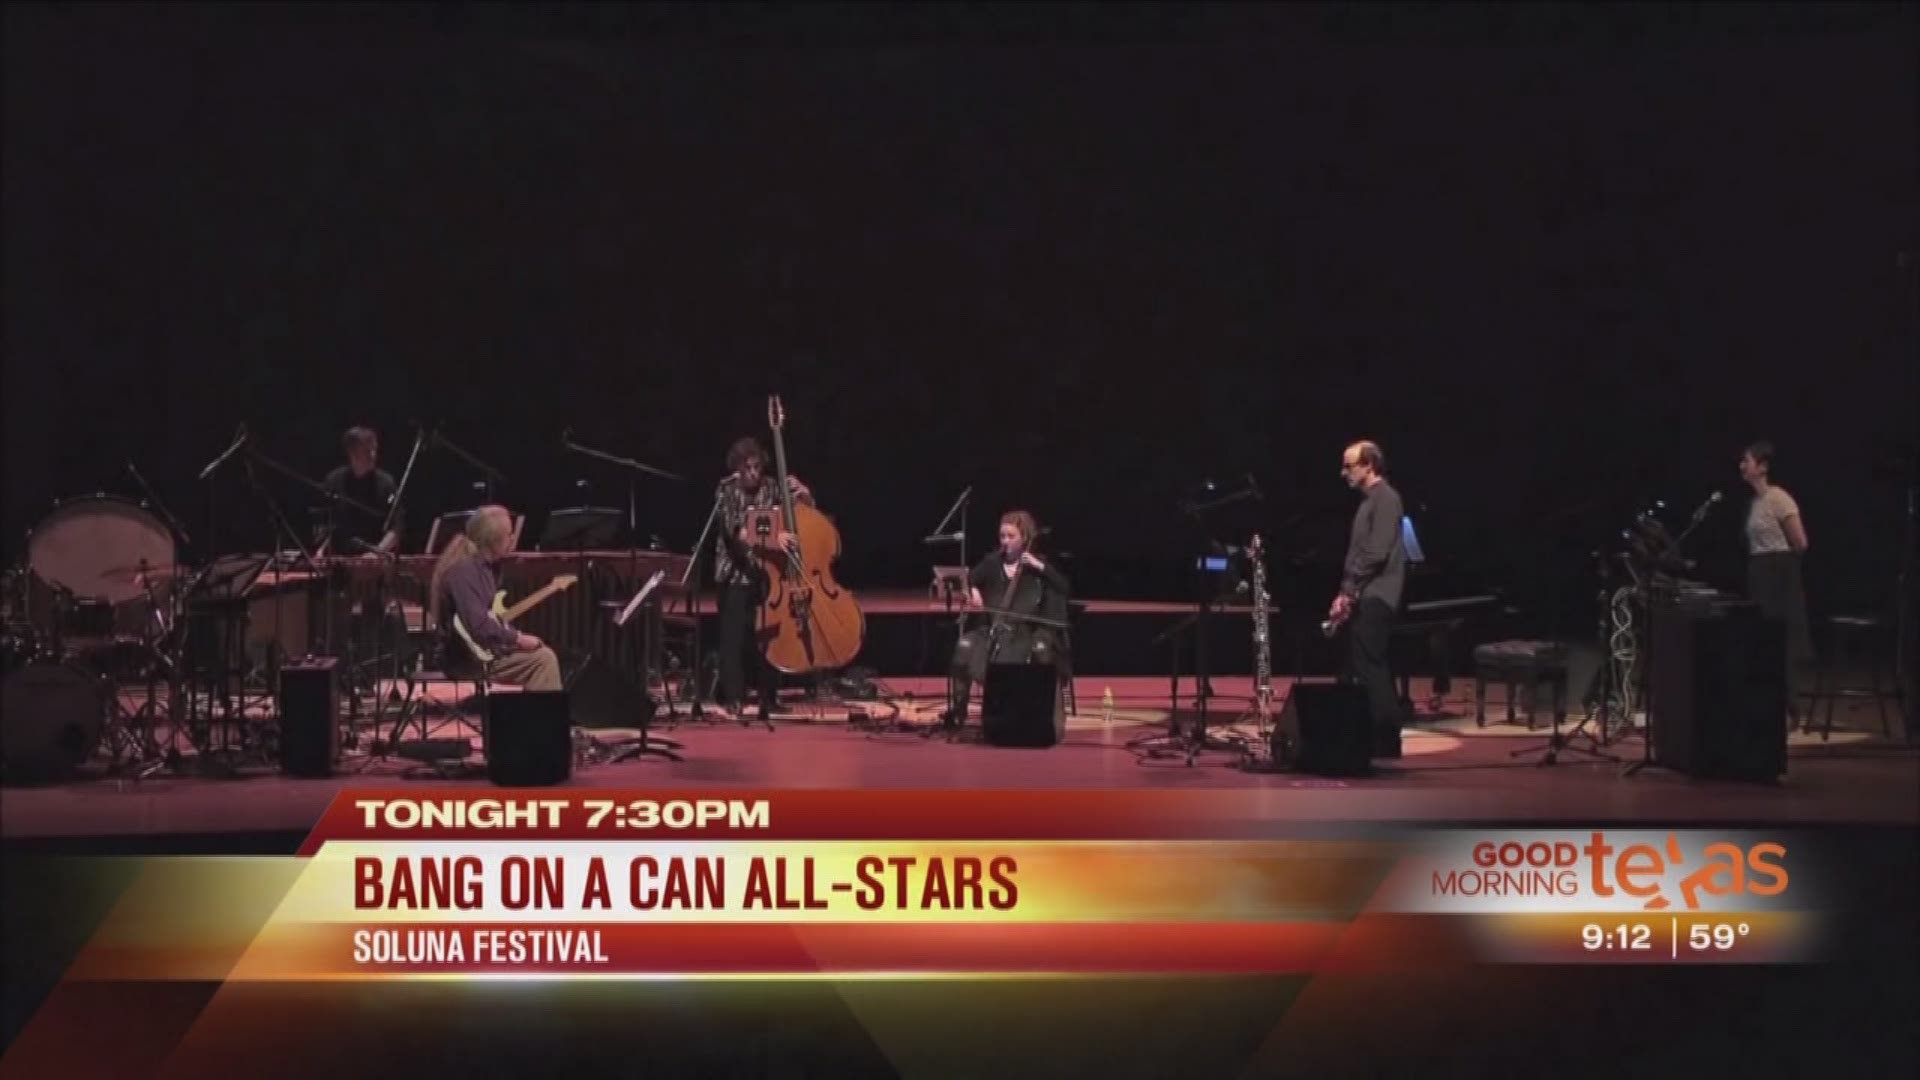 Bang on a Can All-Stars perform at the Soluna Festival tonight 